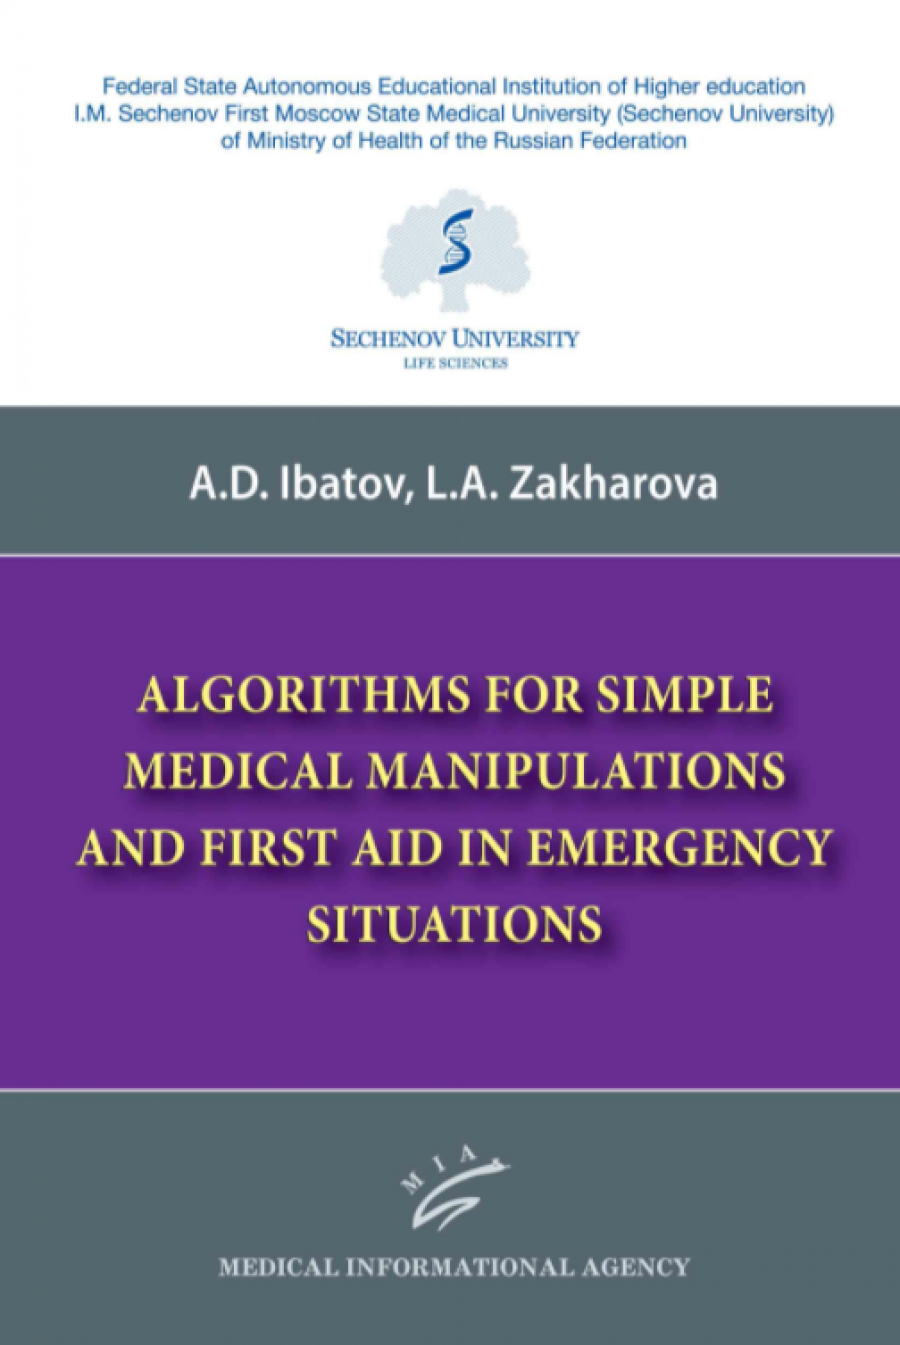  ..,  .. Algorithms for simple medical manipulations and first aid in emergency situations 